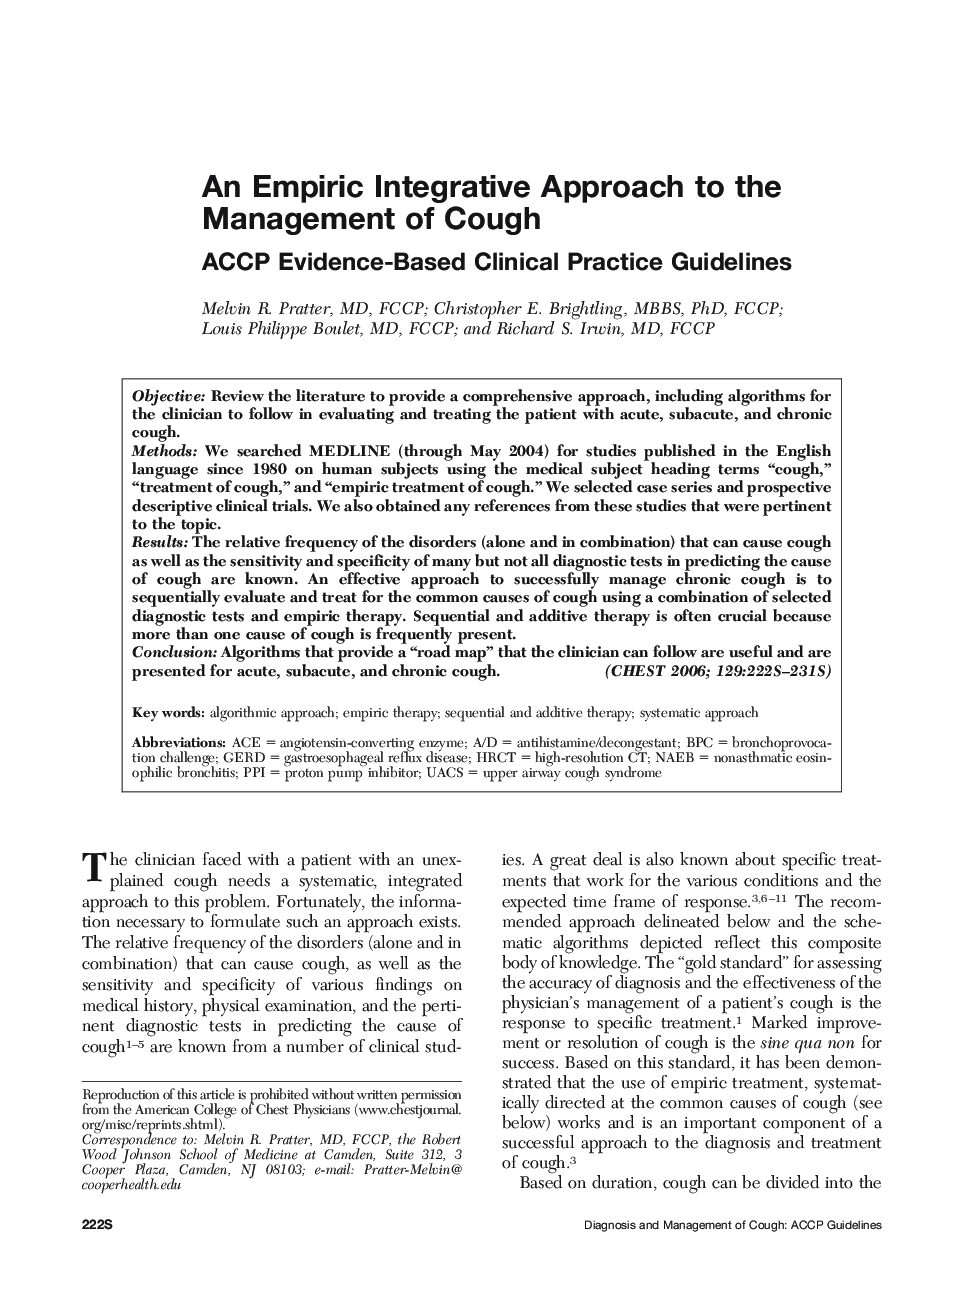 An Empiric Integrative Approach to the Management of Cough : ACCP Evidence-Based Clinical Practice Guidelines